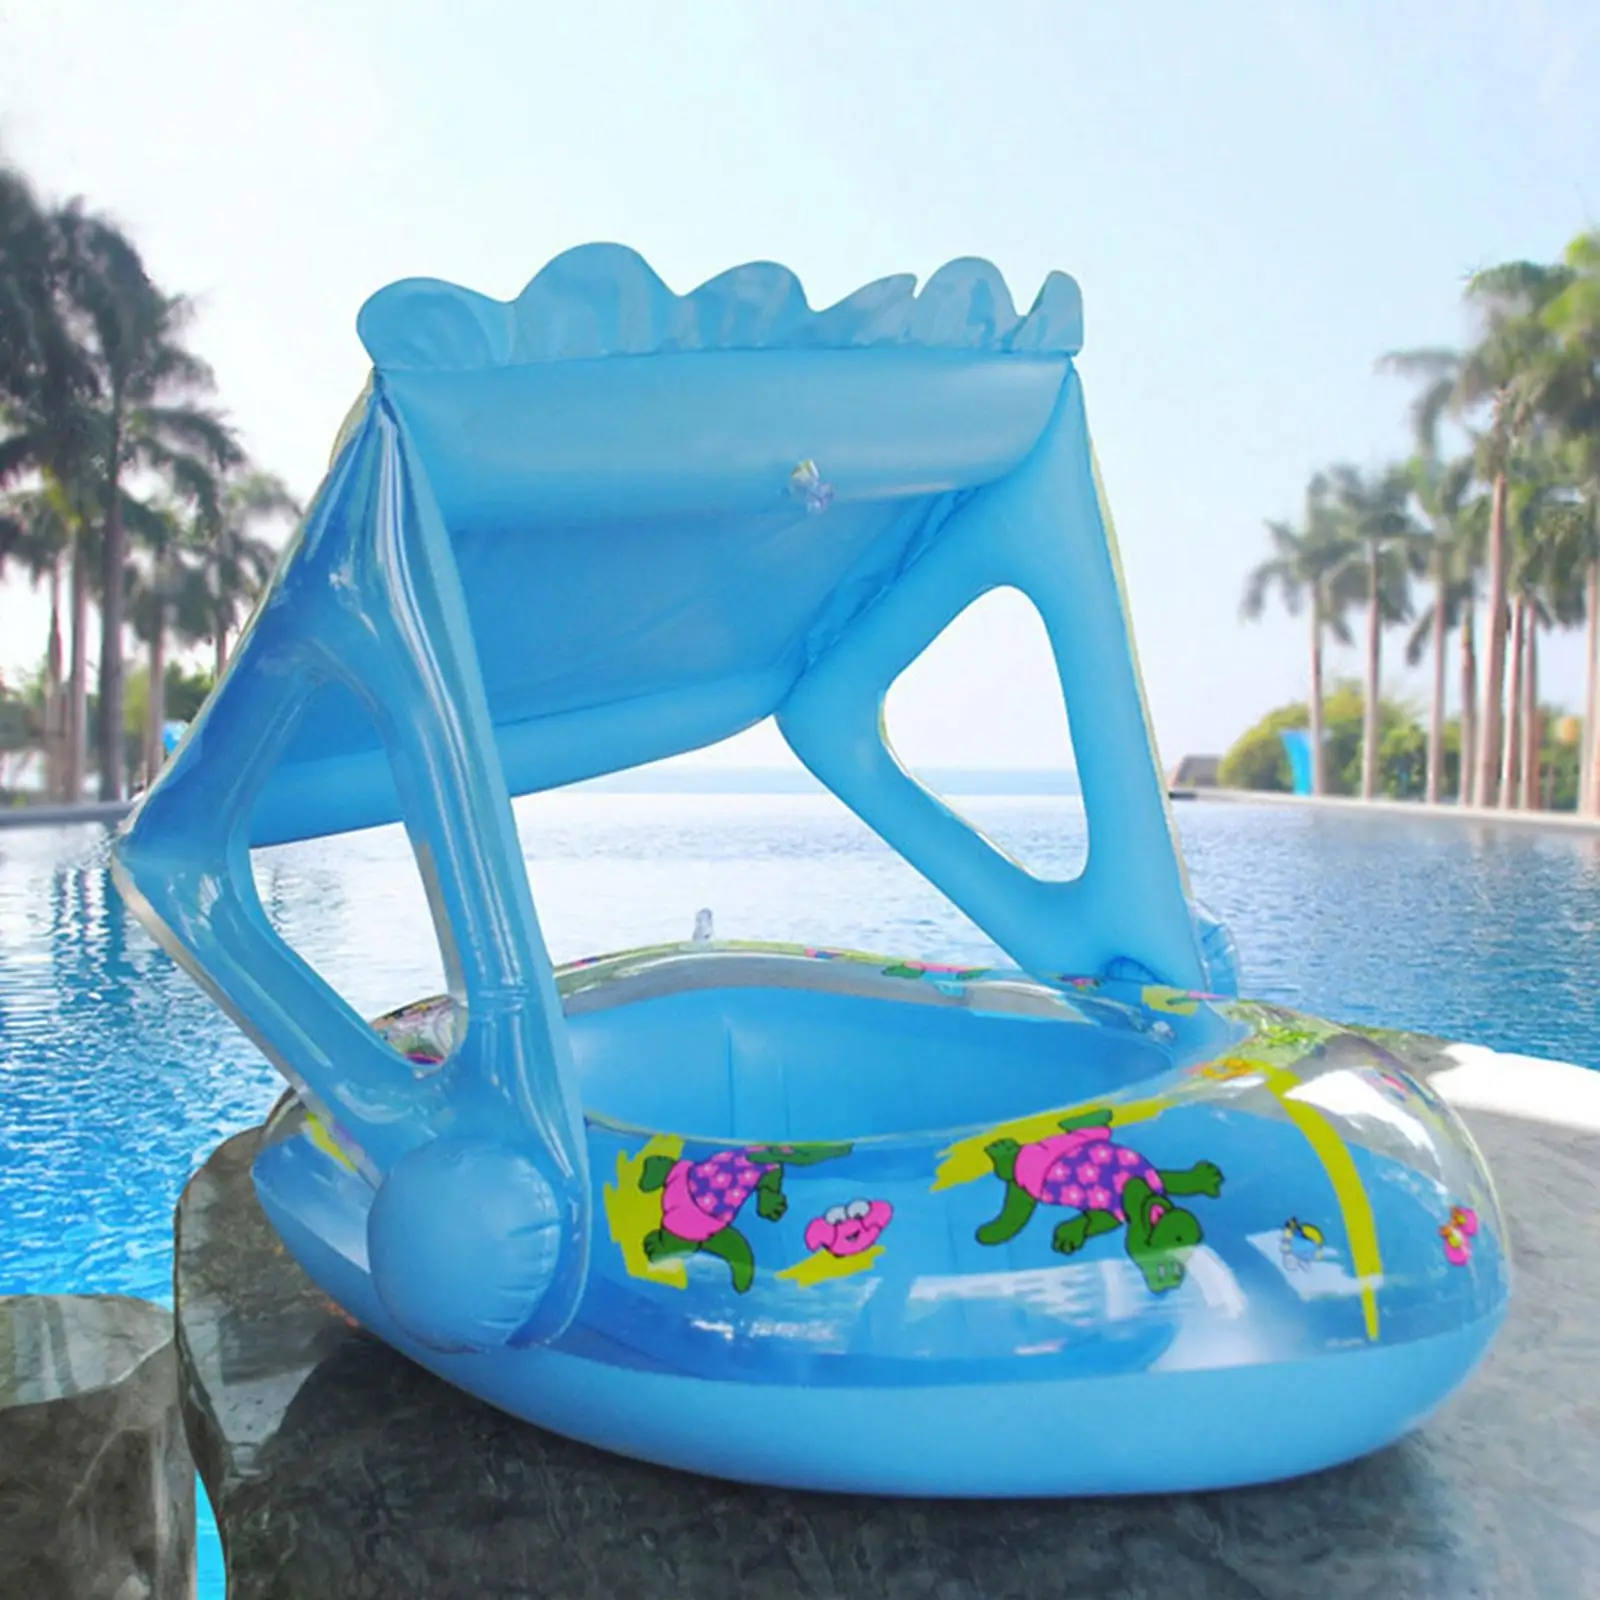 Kids Float Rings with Canopy Learn Swim Bathtub Toys Swimming Float with Sunshade for Kids Children Boys and Girls